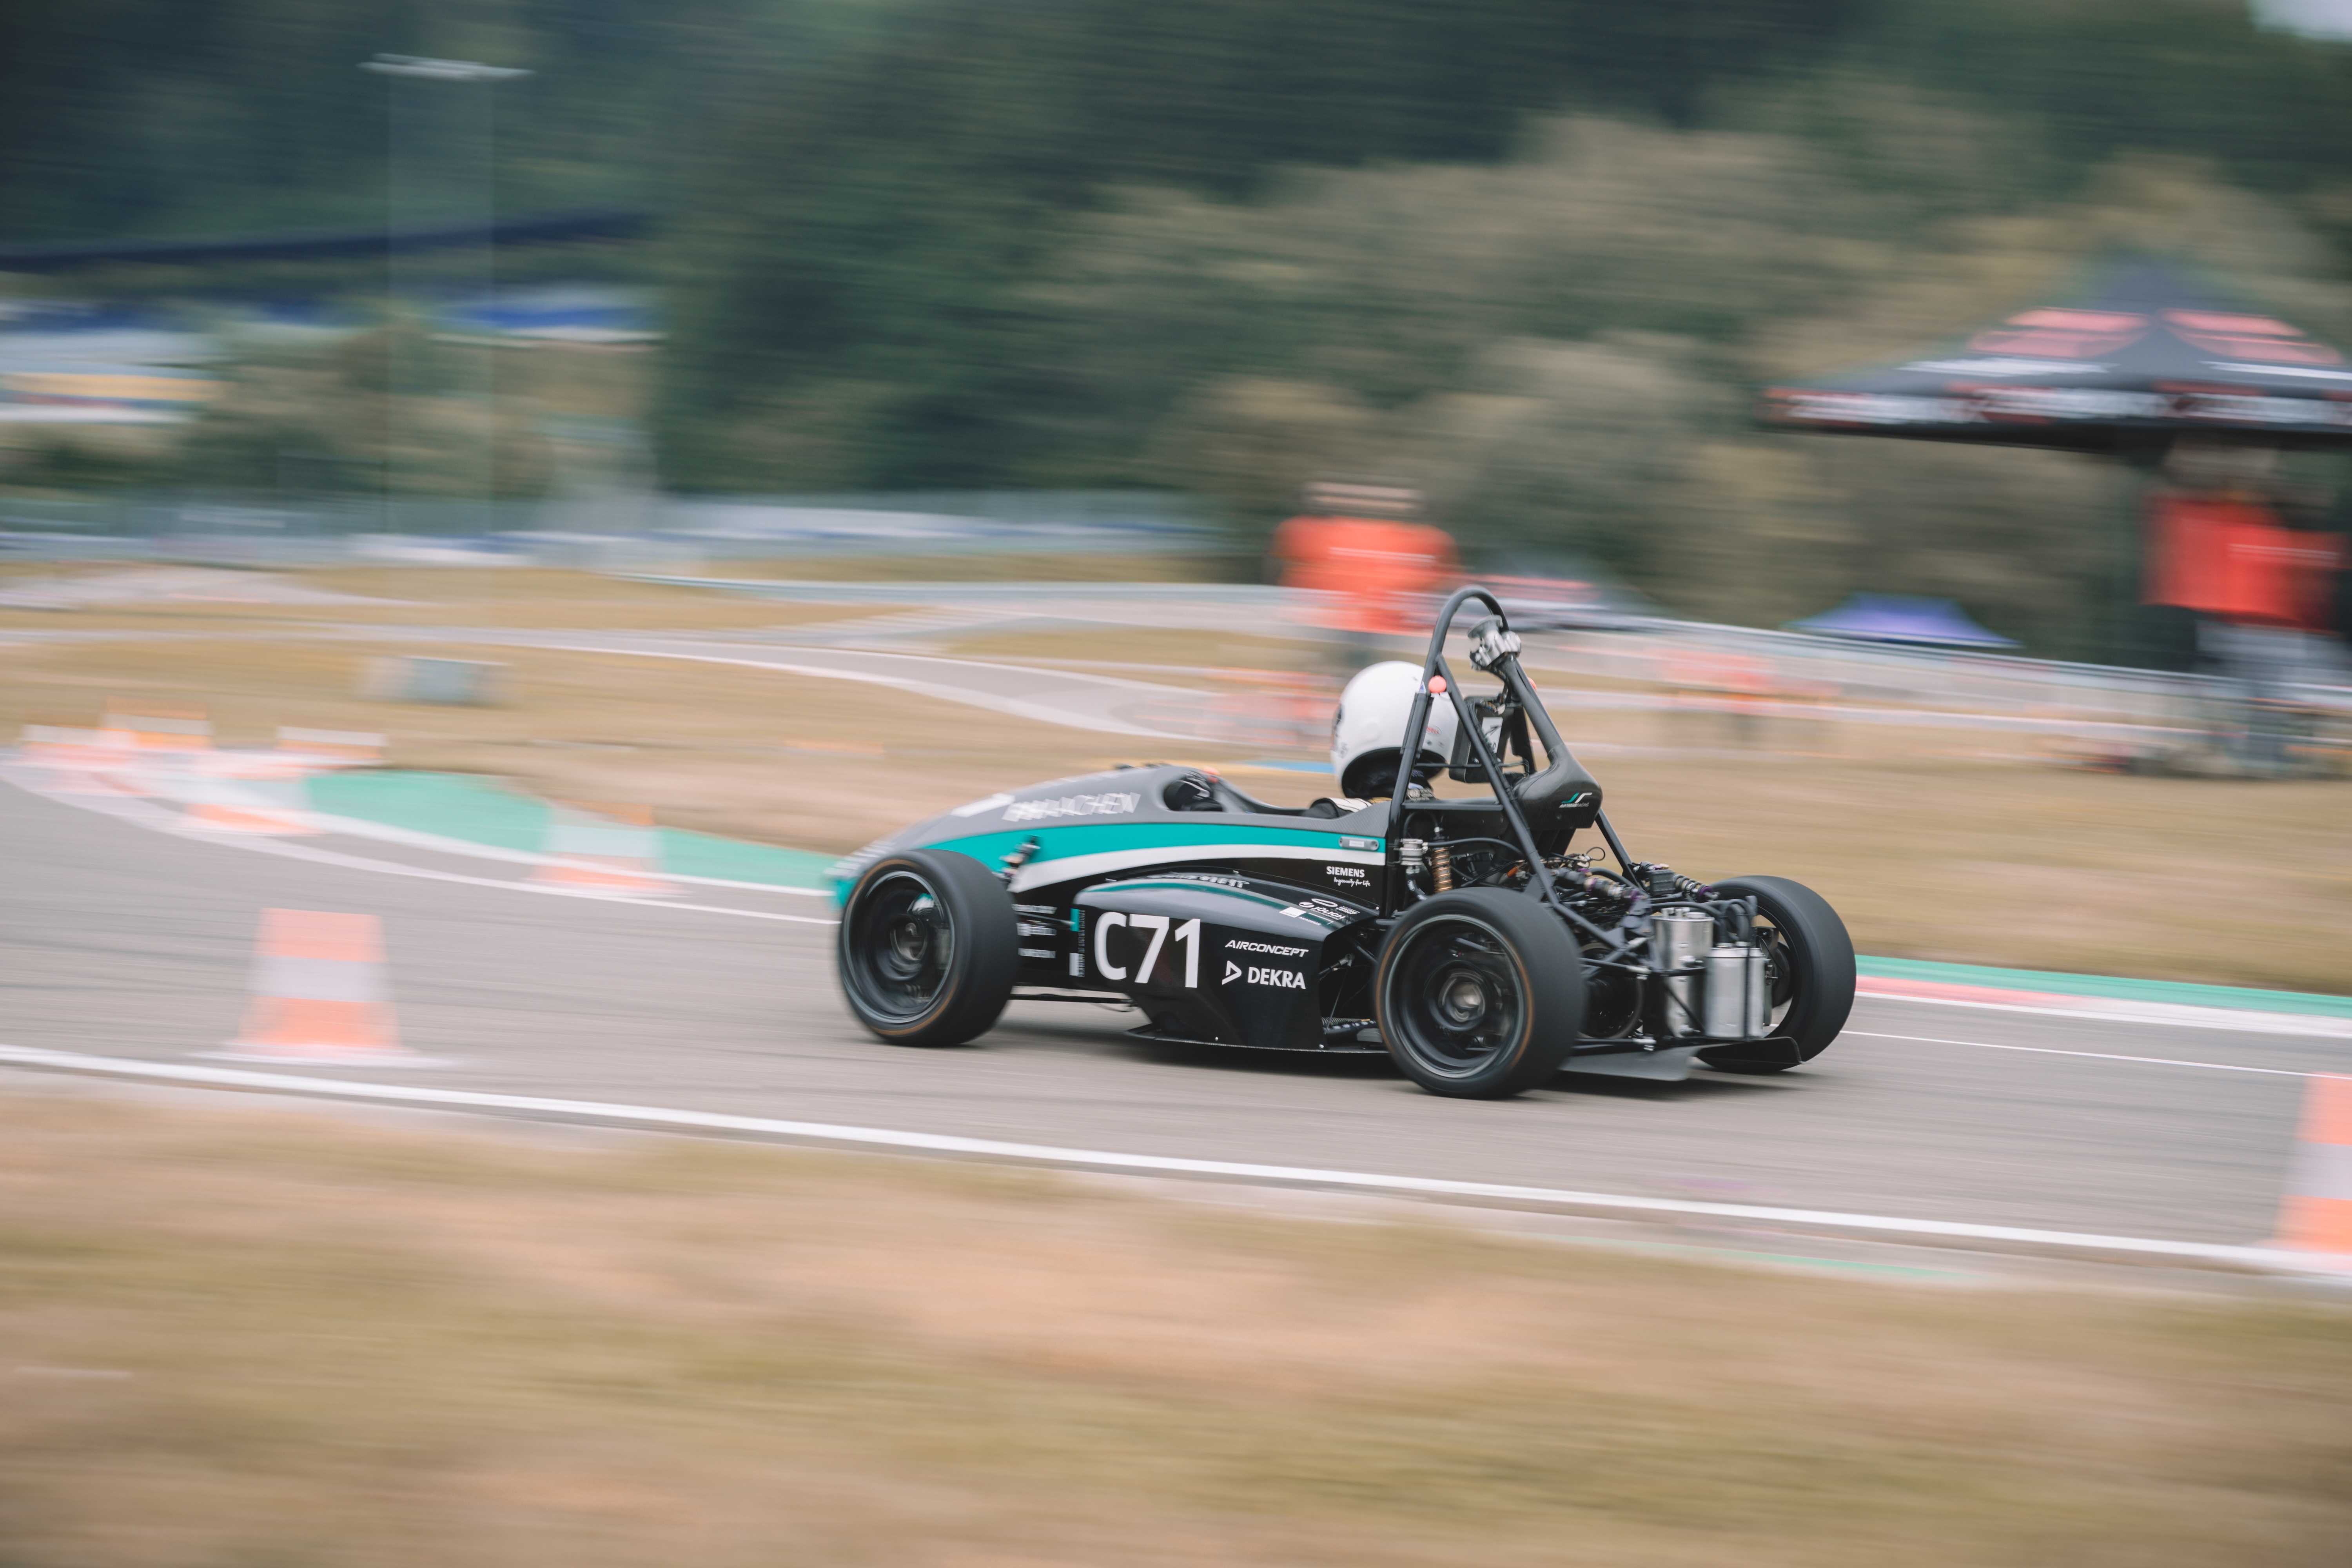 The Aixtreme Racing Team of Aachen University of Applied Sciences